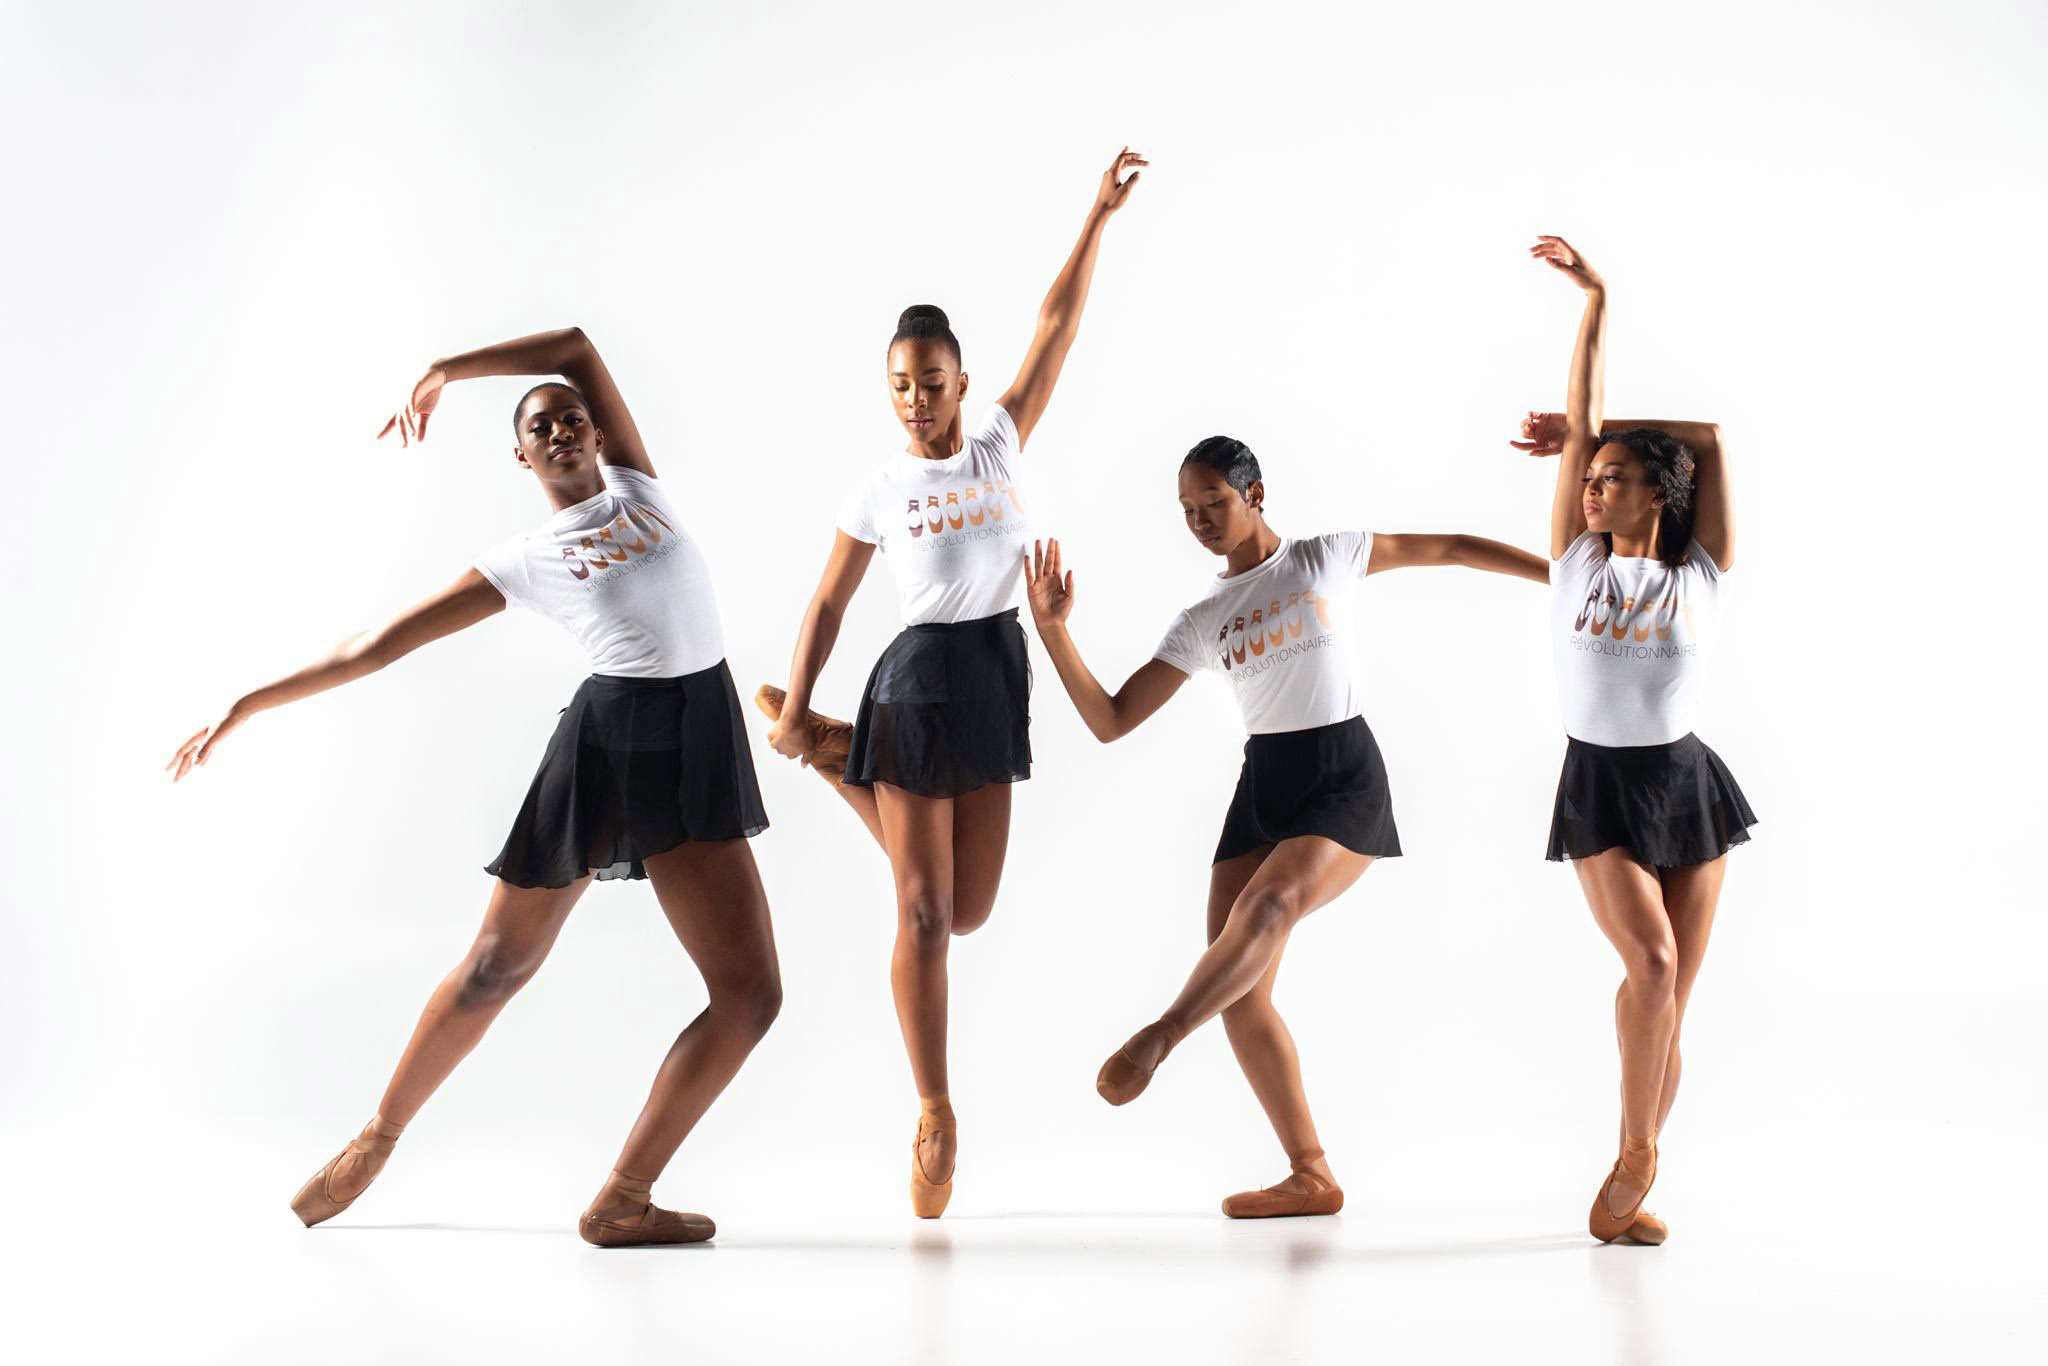 Four Black women pose on a white backdrop wearing pointe shoes that match their varied skin tones, black wrap skirts, and white t-shirts with the Révolutionnaire logo.